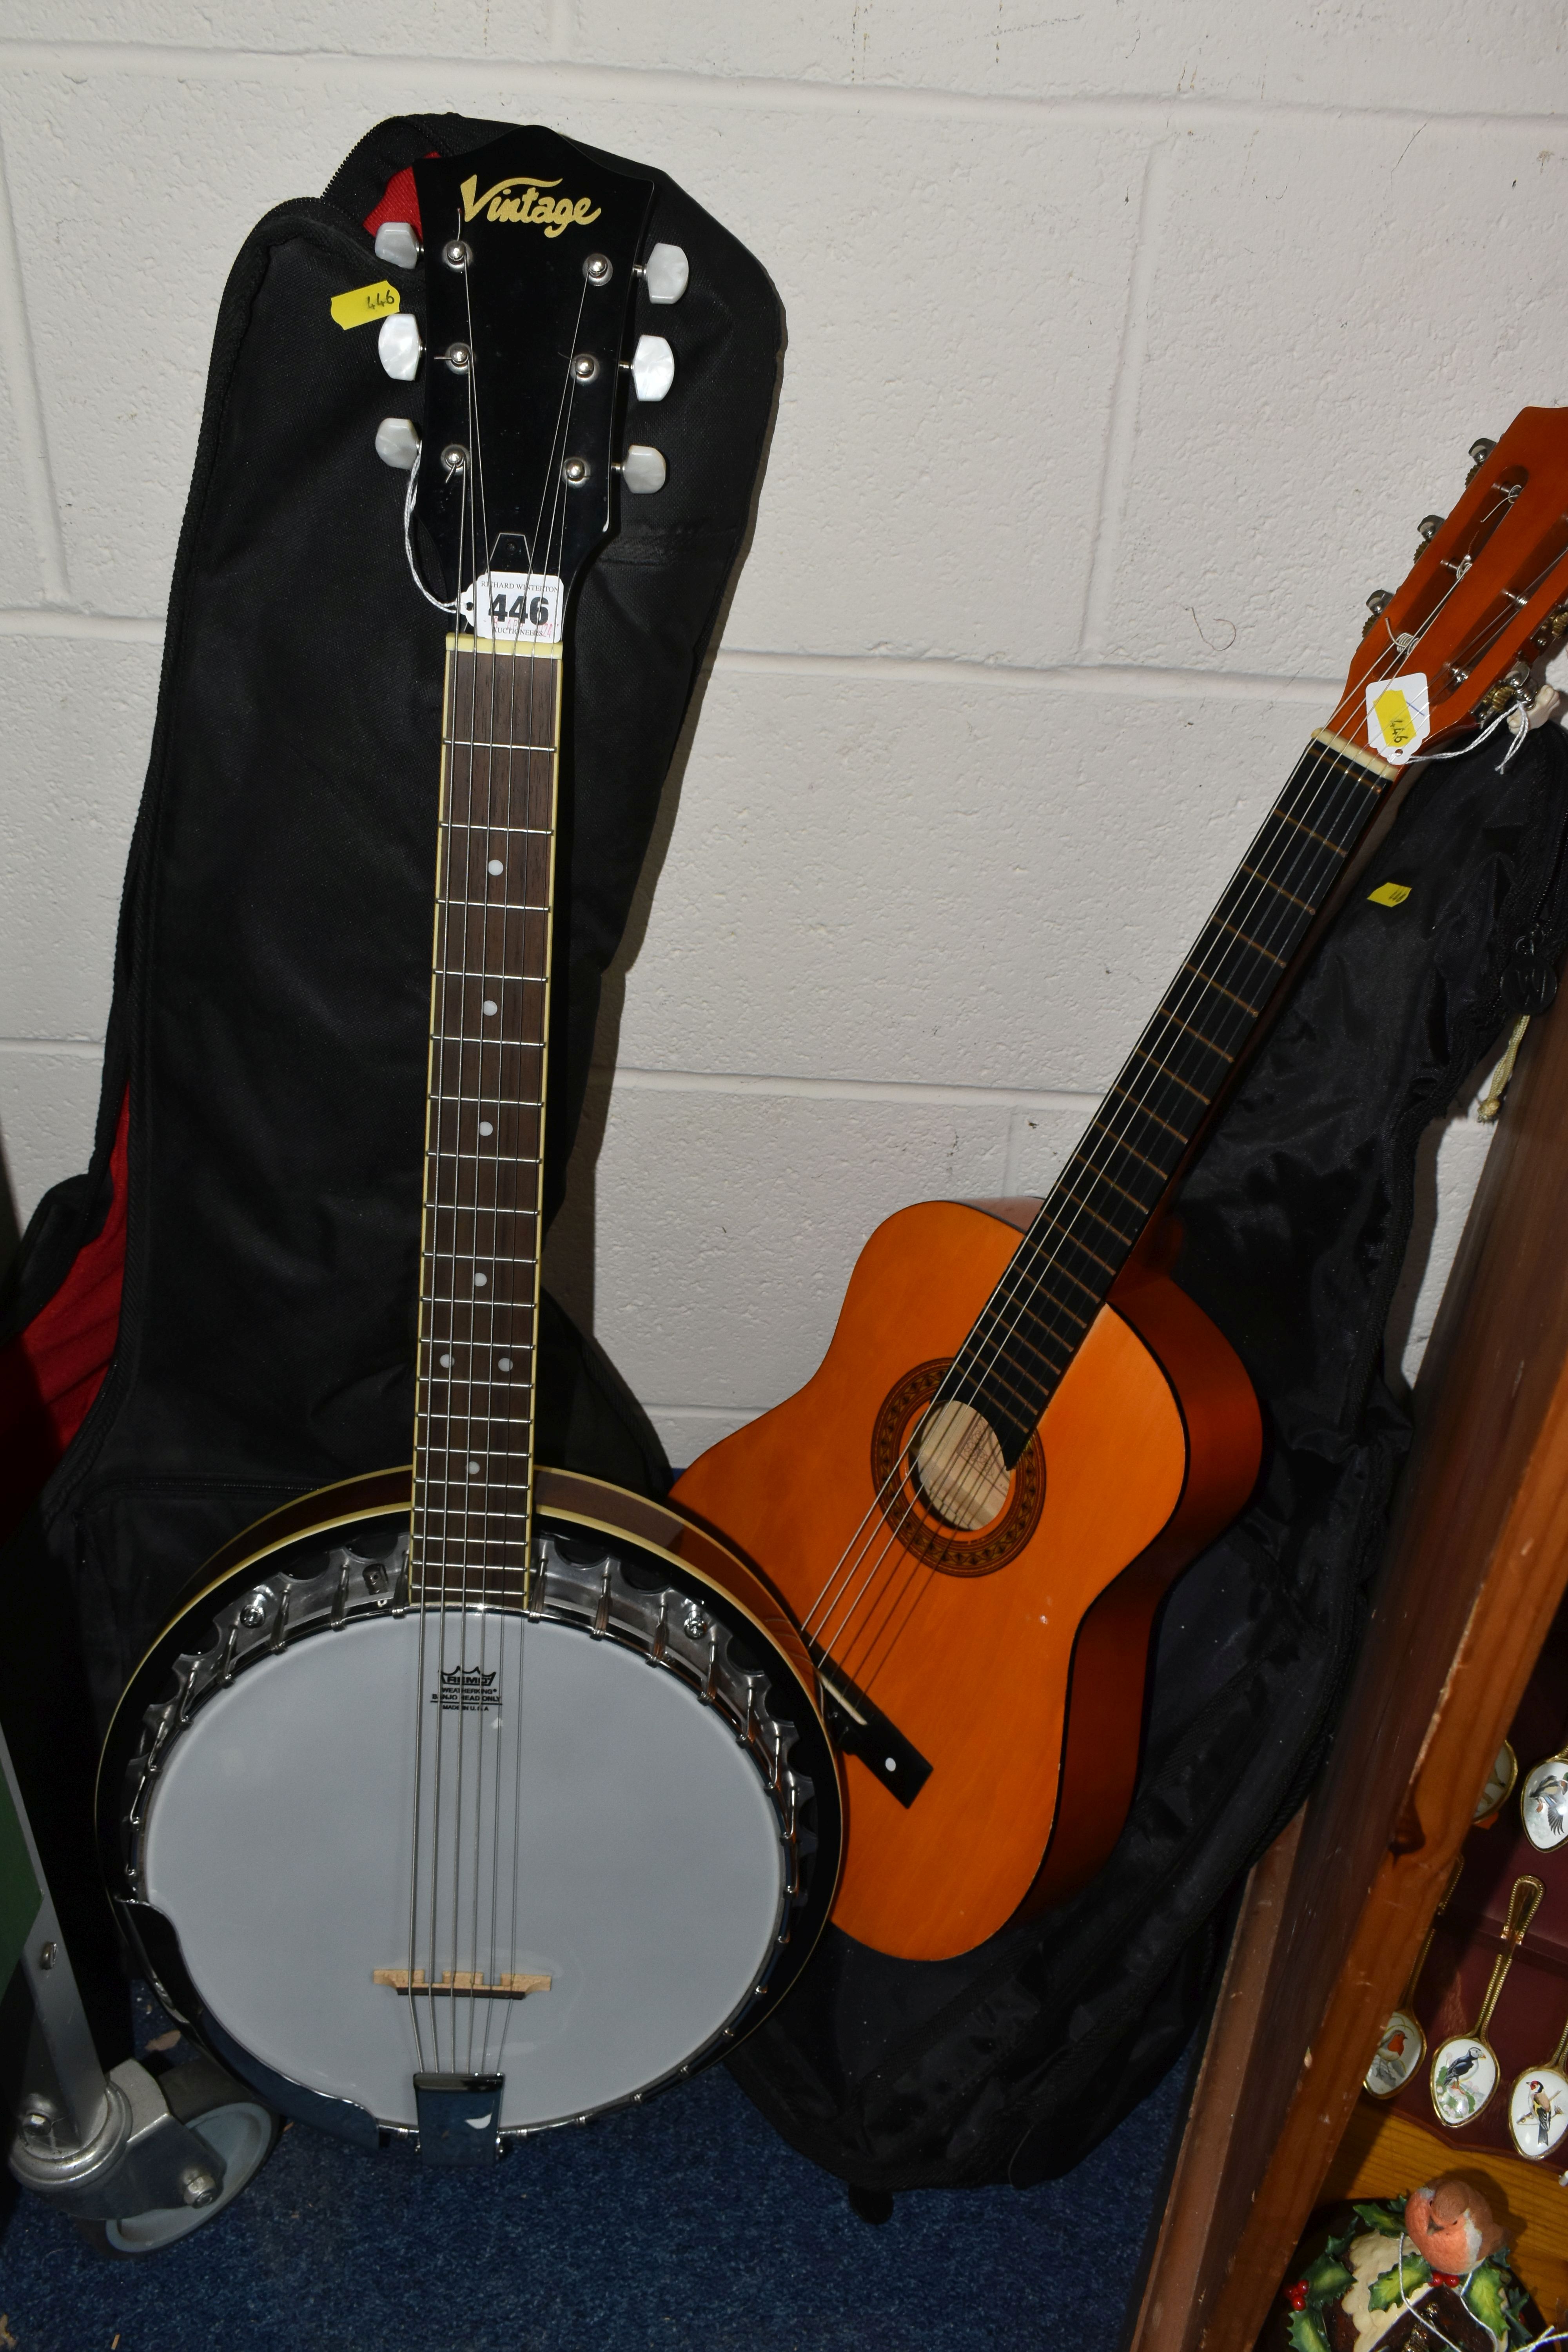 A 'VINTAGE' BANJO AND CHILD'S ACOUSTIC GUITAR, comprising a six string banjo with a soft case and